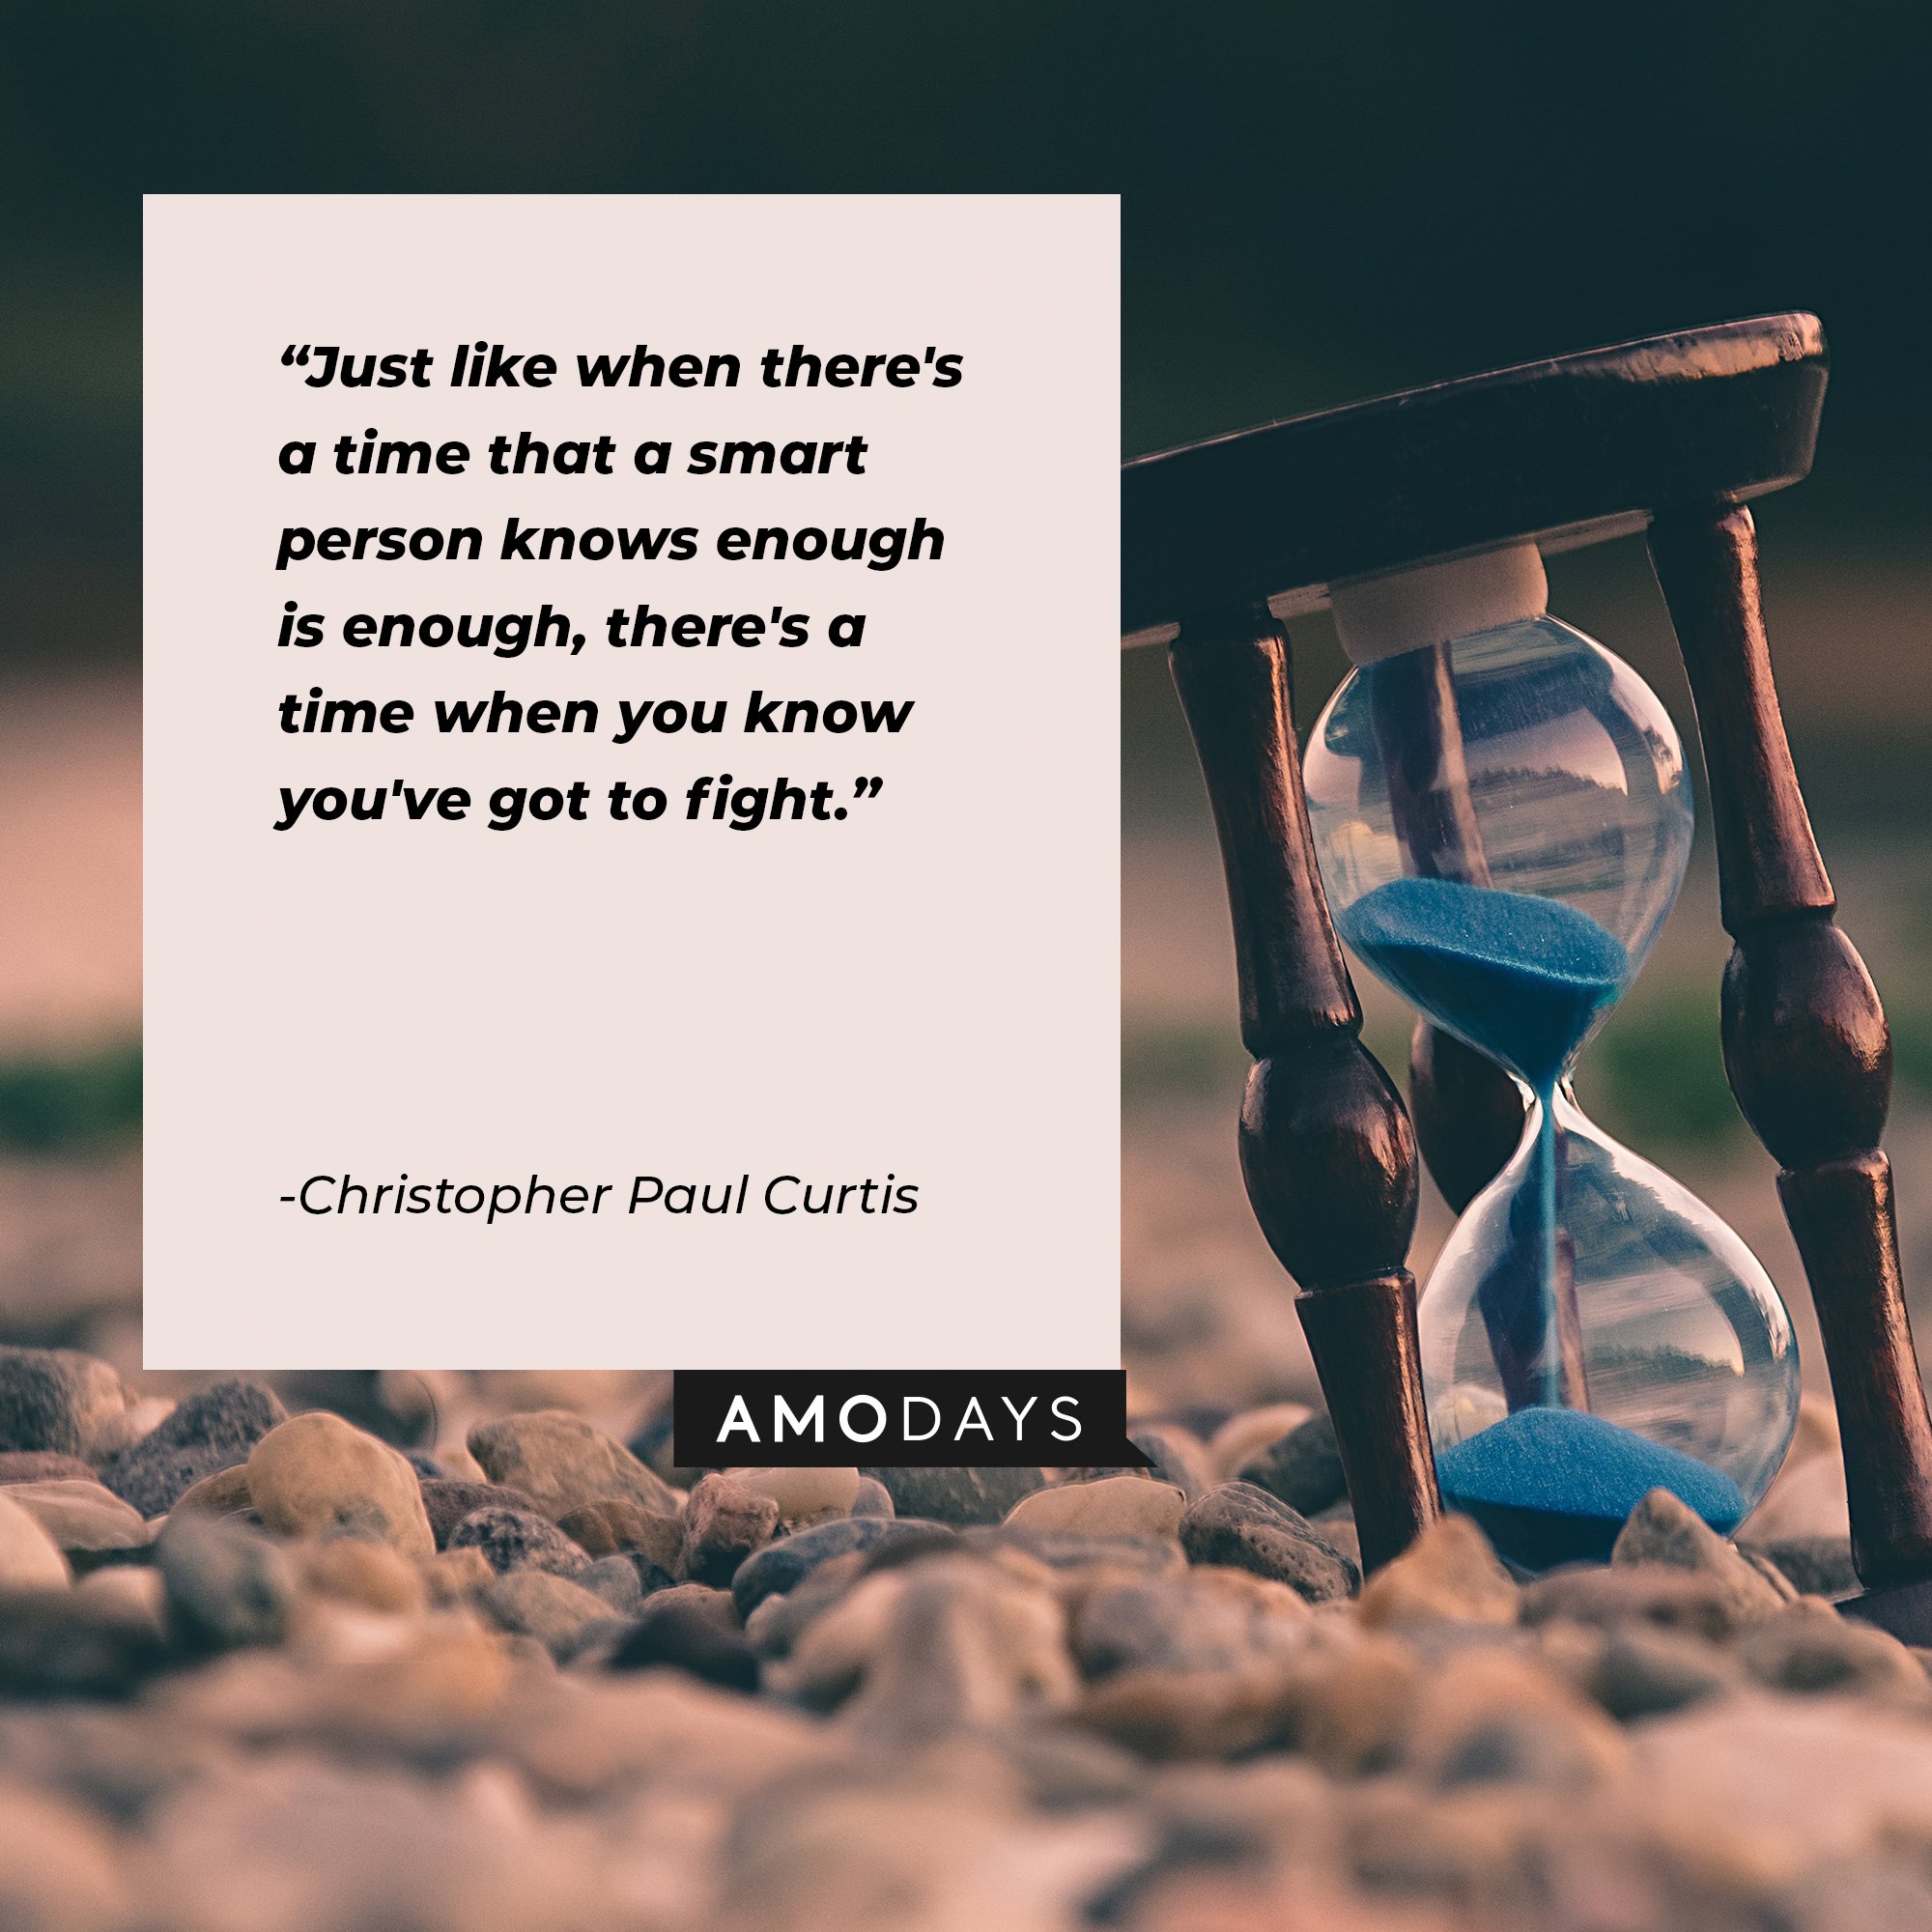 Christopher Paul Curtis’ quote: “Just like when there's a time that a smart person knows enough is enough, there's a time when you know you've got to fight.” | Image: AmoDays 